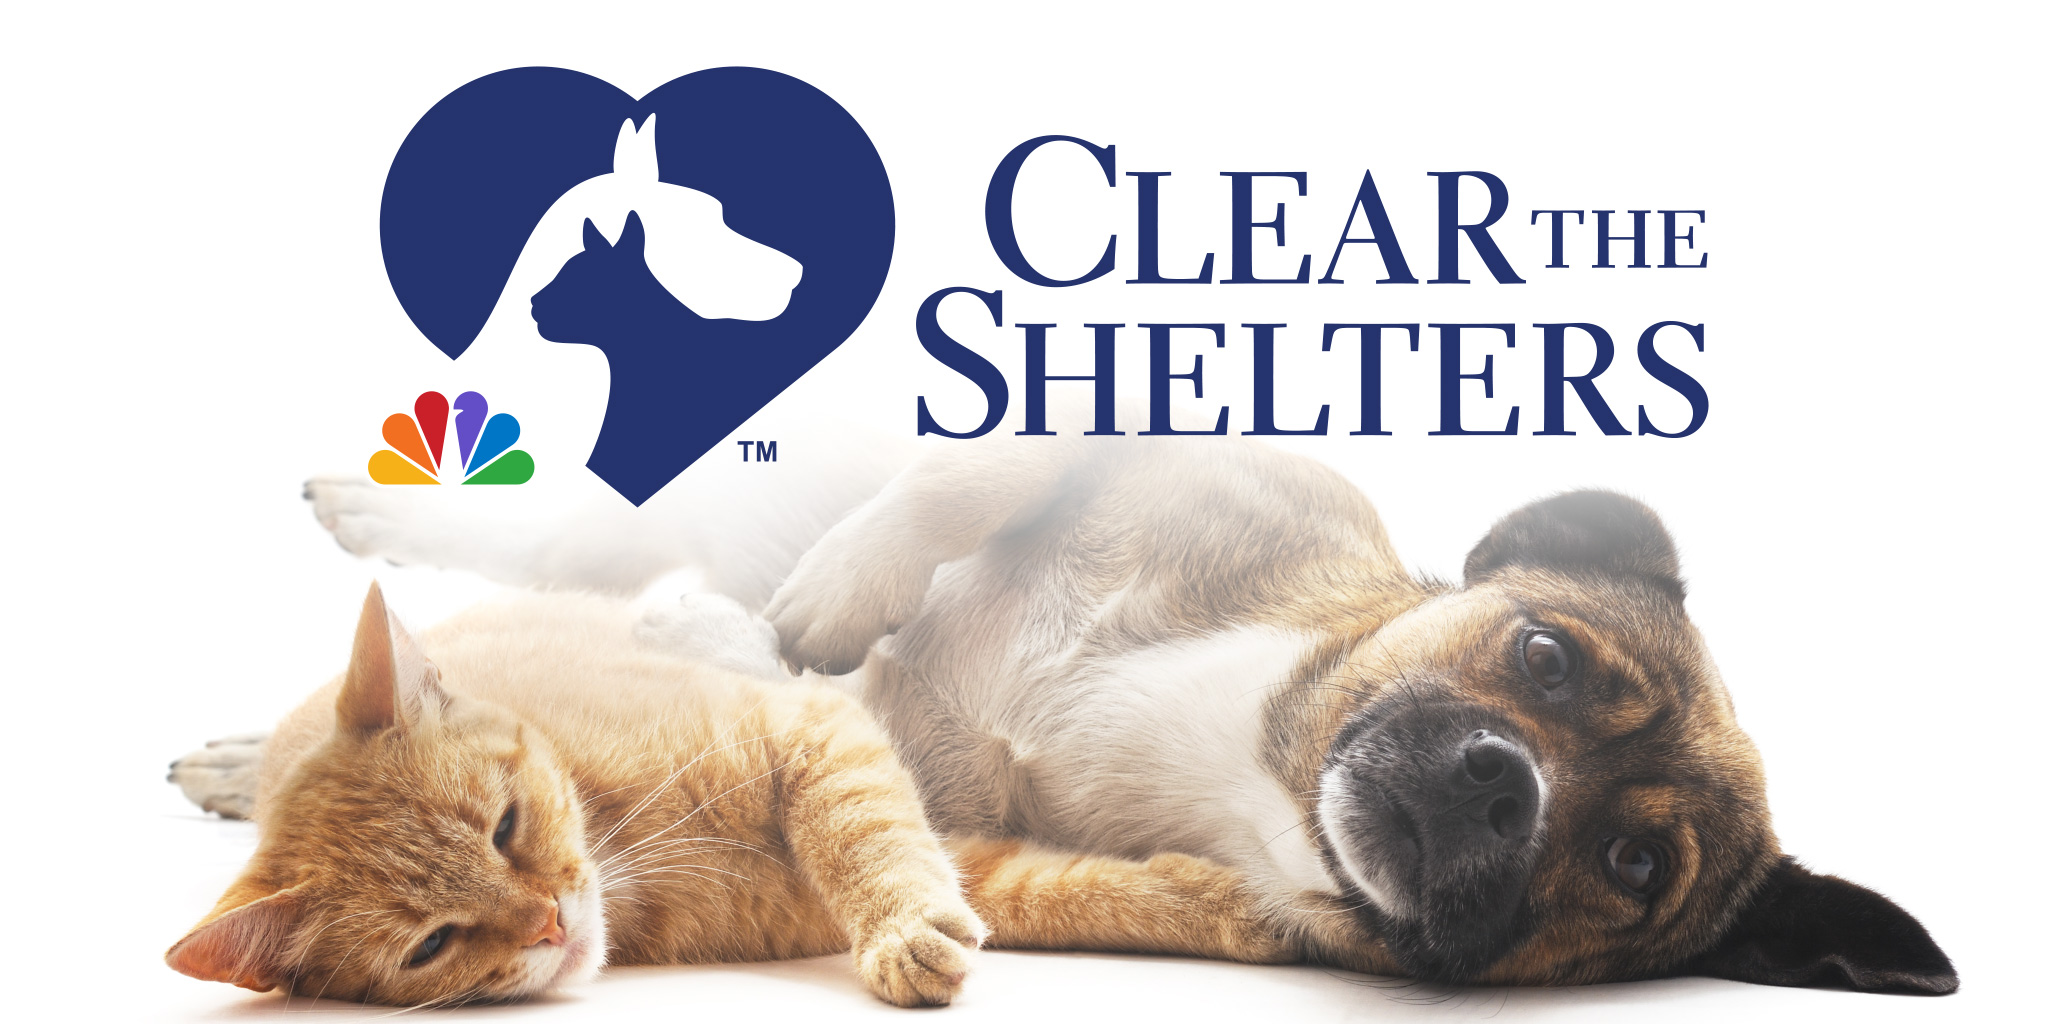 Clear the Shelters